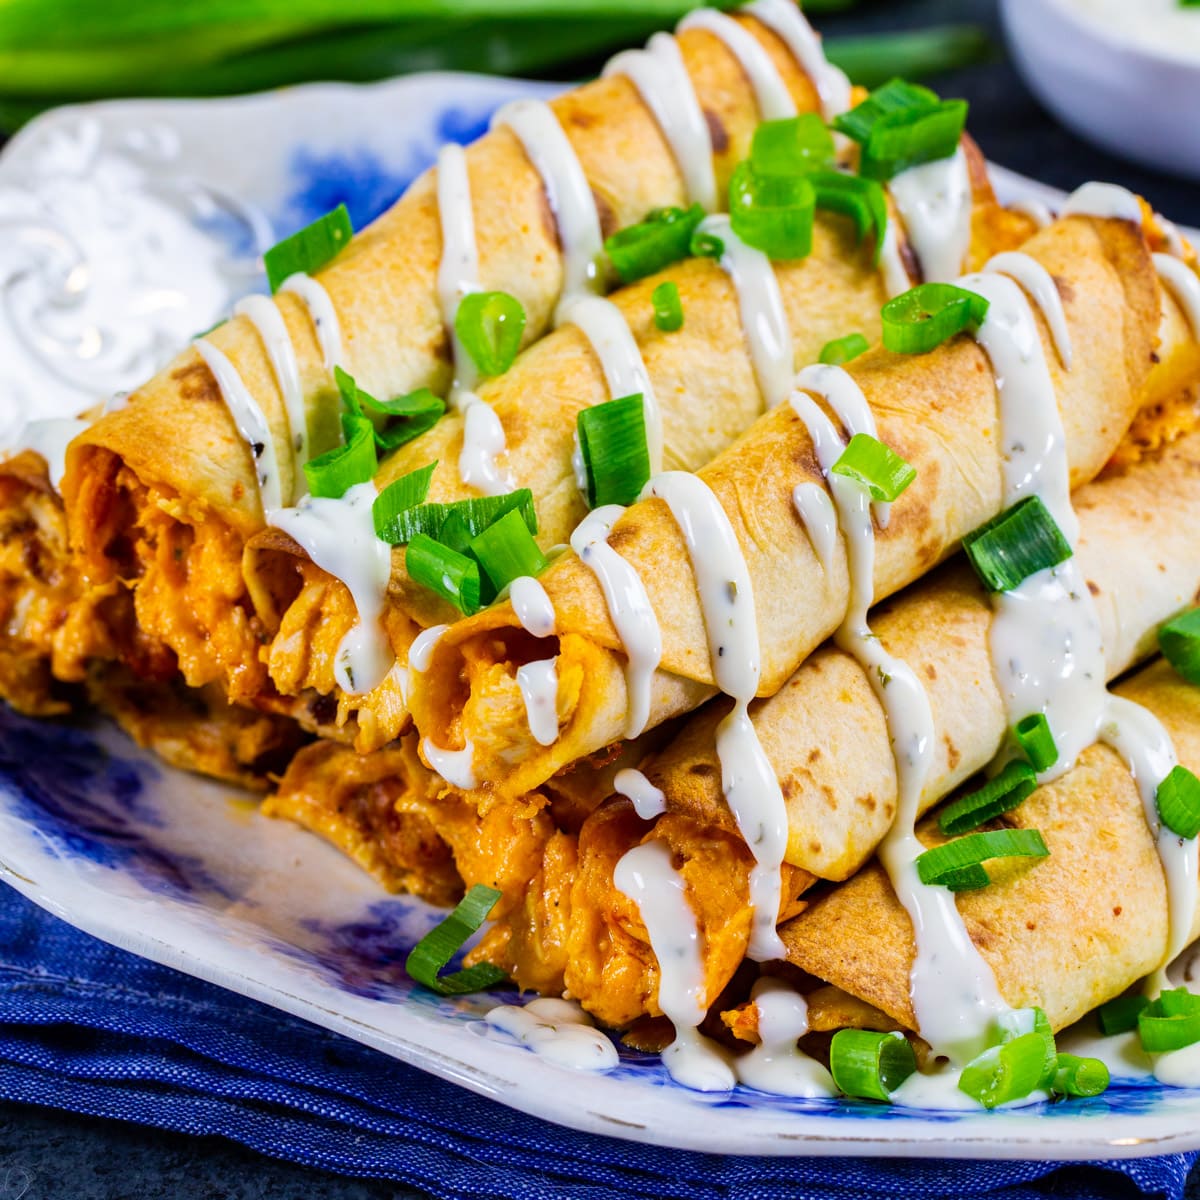 Cheesy Buffalo Chicken Taquitos piled on a plate.